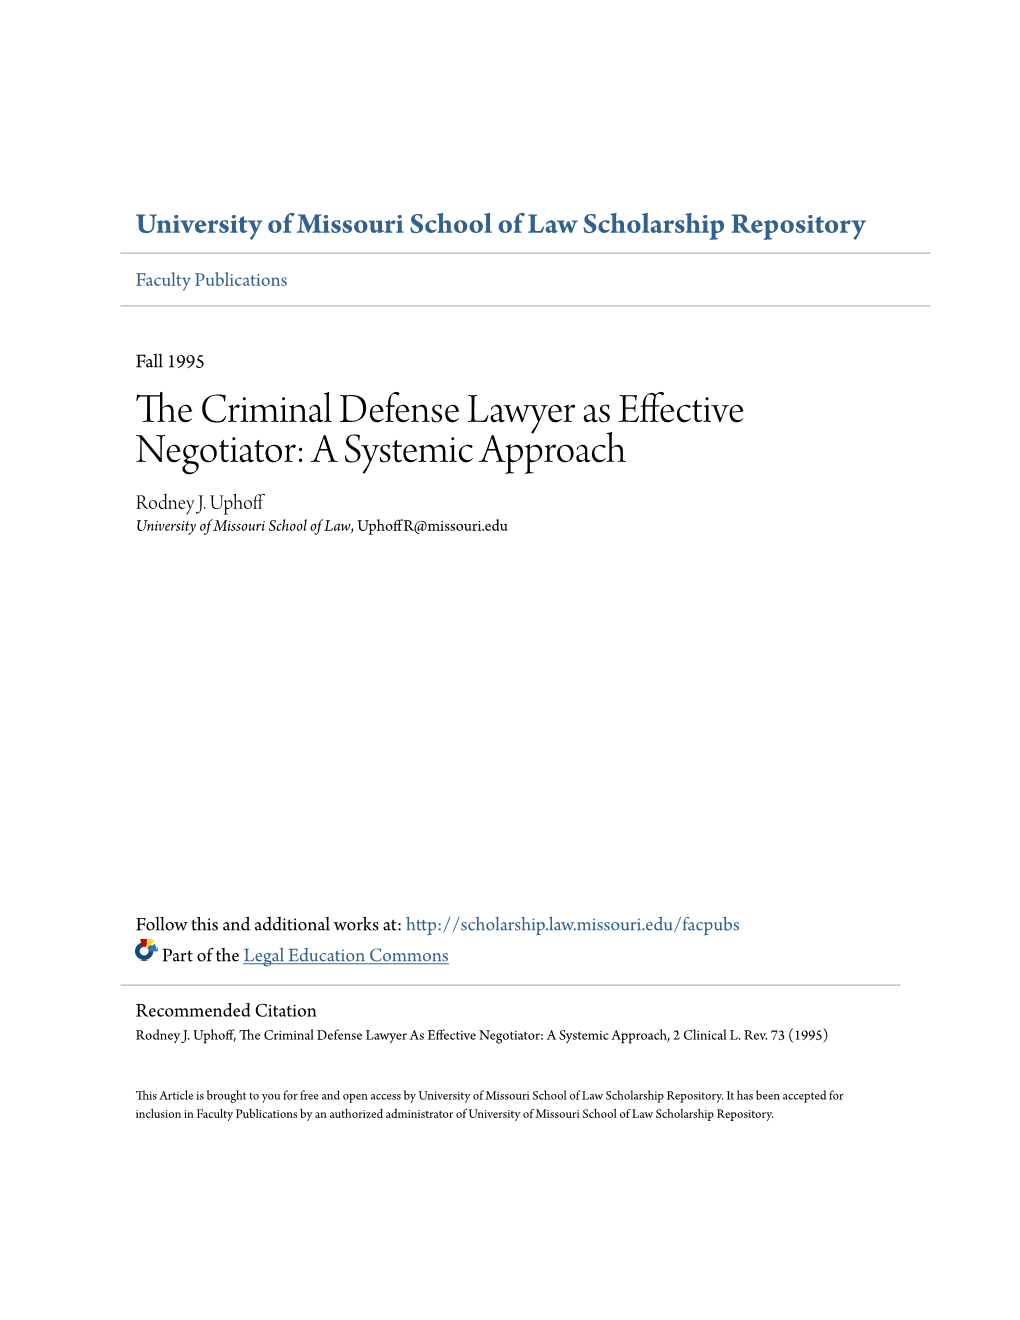 The Criminal Defense Lawyer As Effective Negotiator: a Systemic Approach